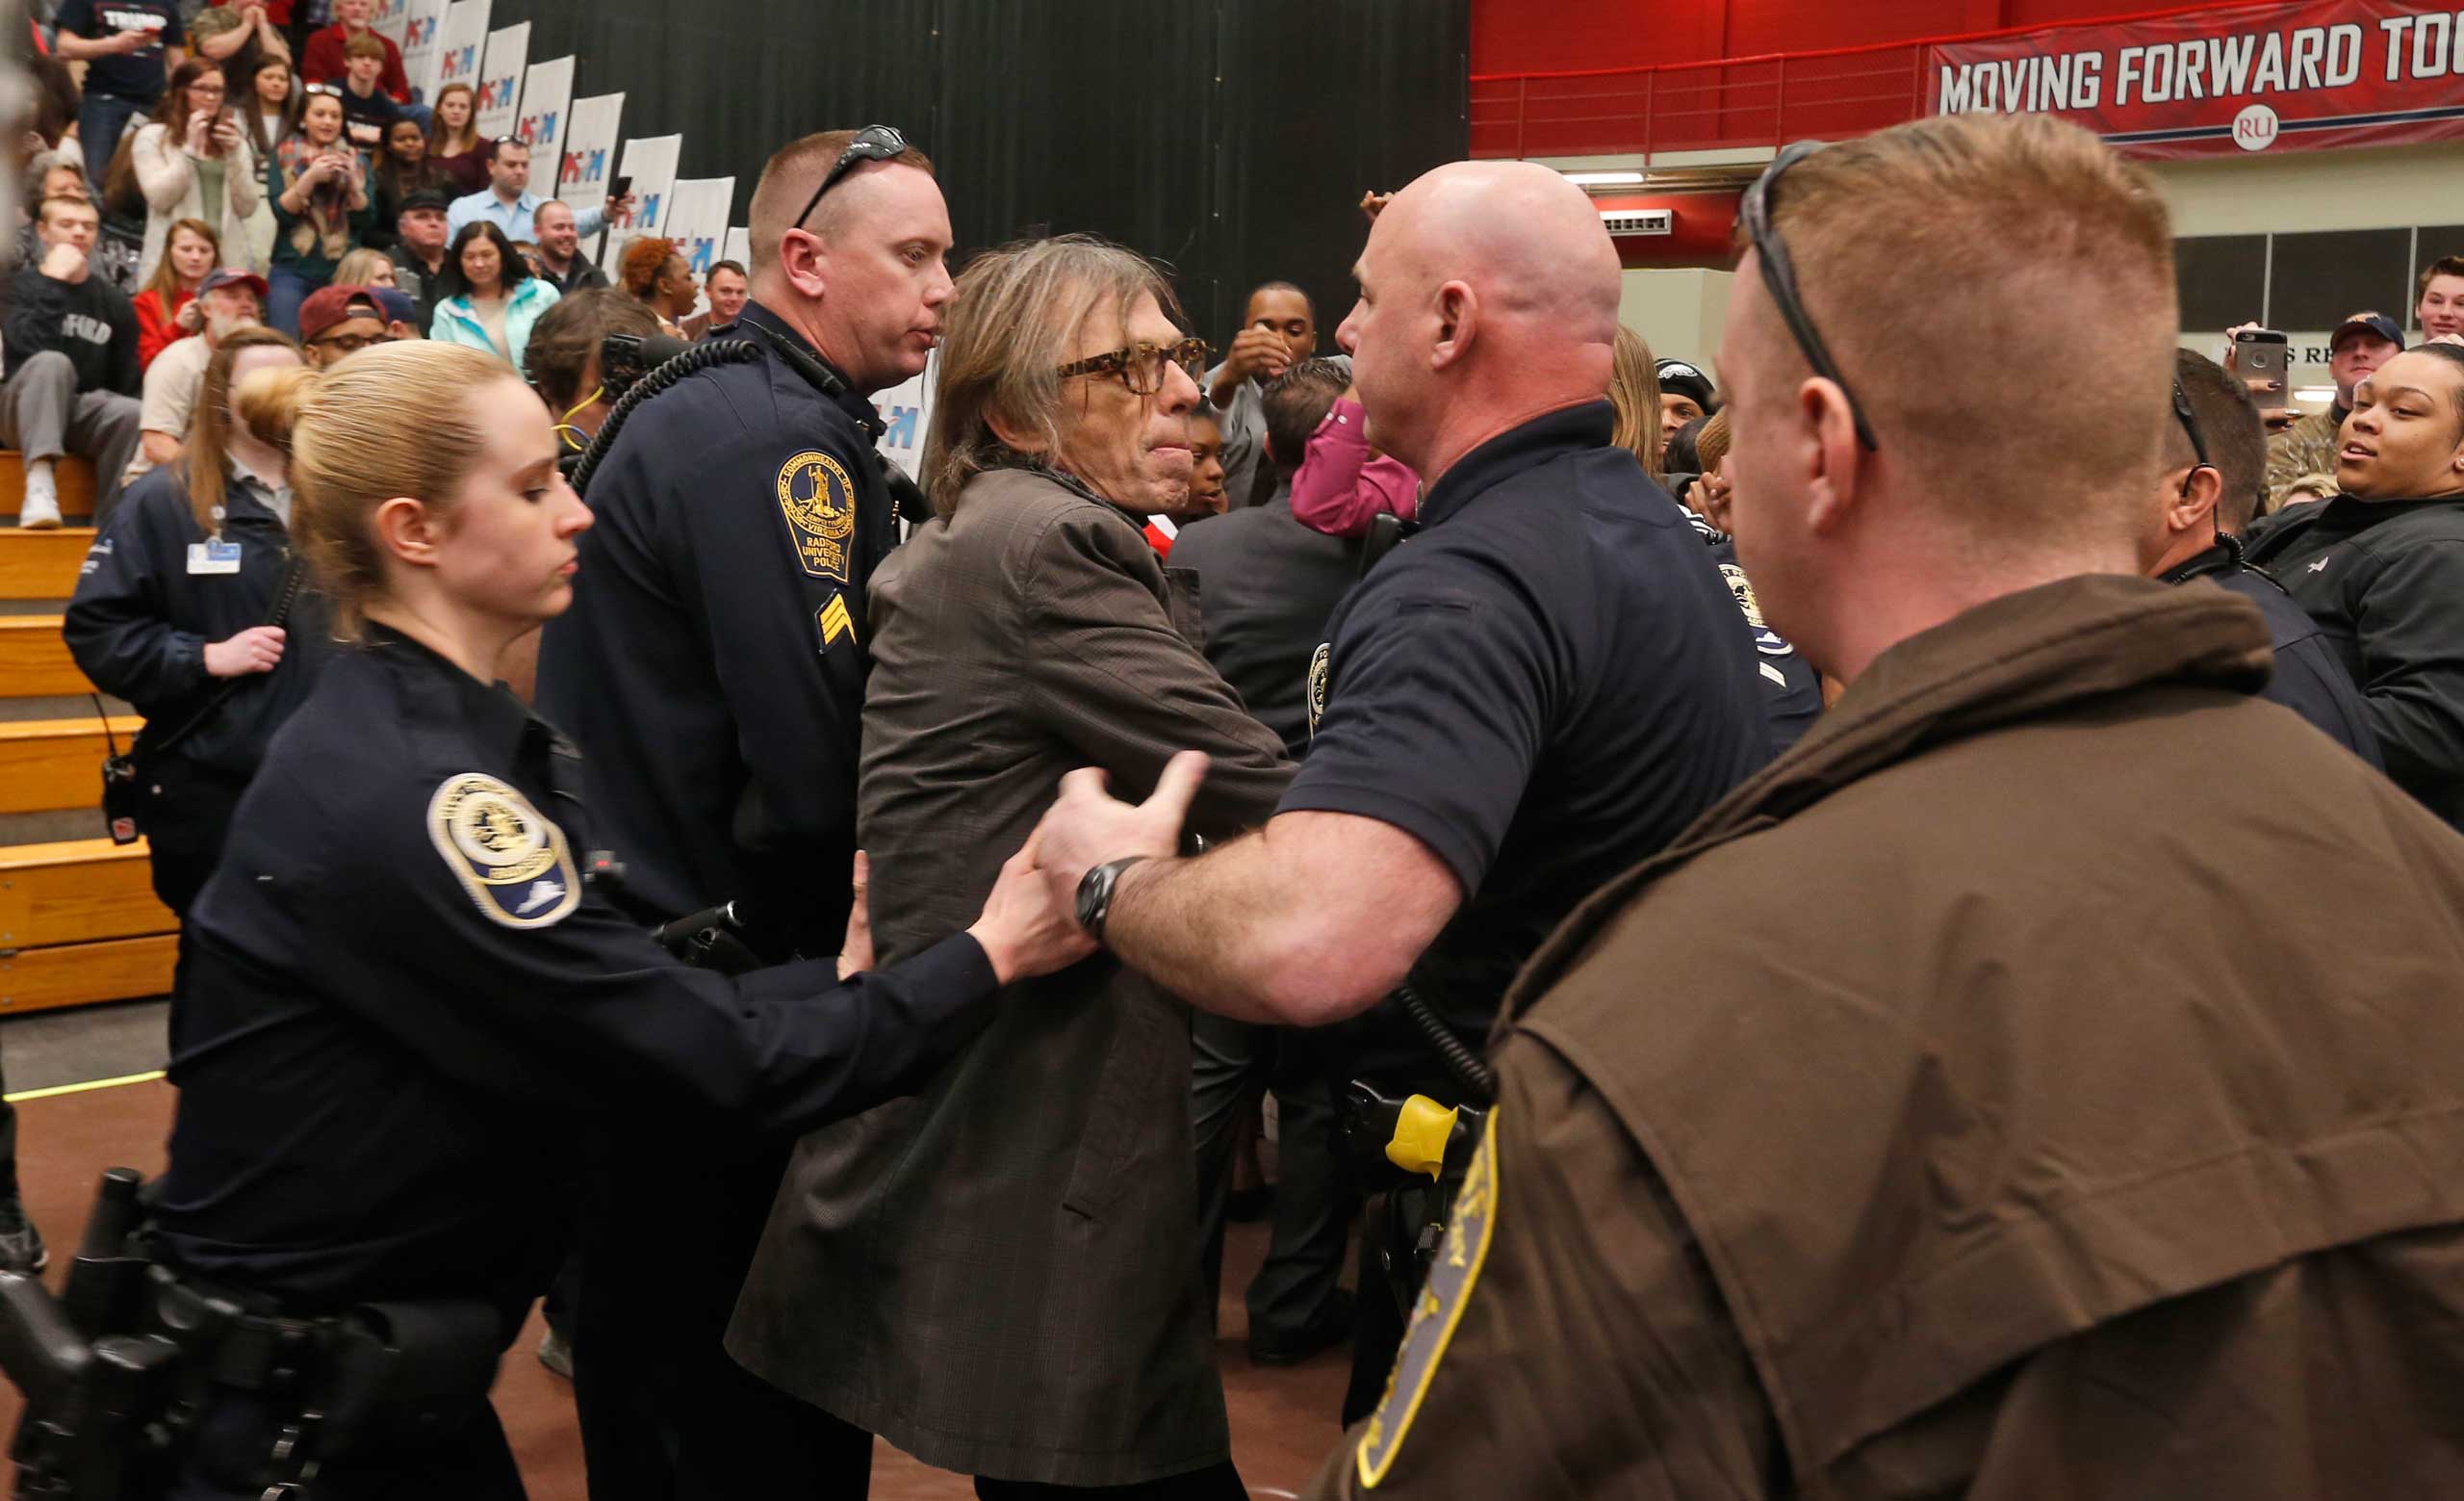 TIME photographer Christopher Morris is detained by police during a rally of Republican presidential candidate, Donald Trump, at Radford University in Radford, Va., Feb. 29, 2016. (Steve Helber—AP)